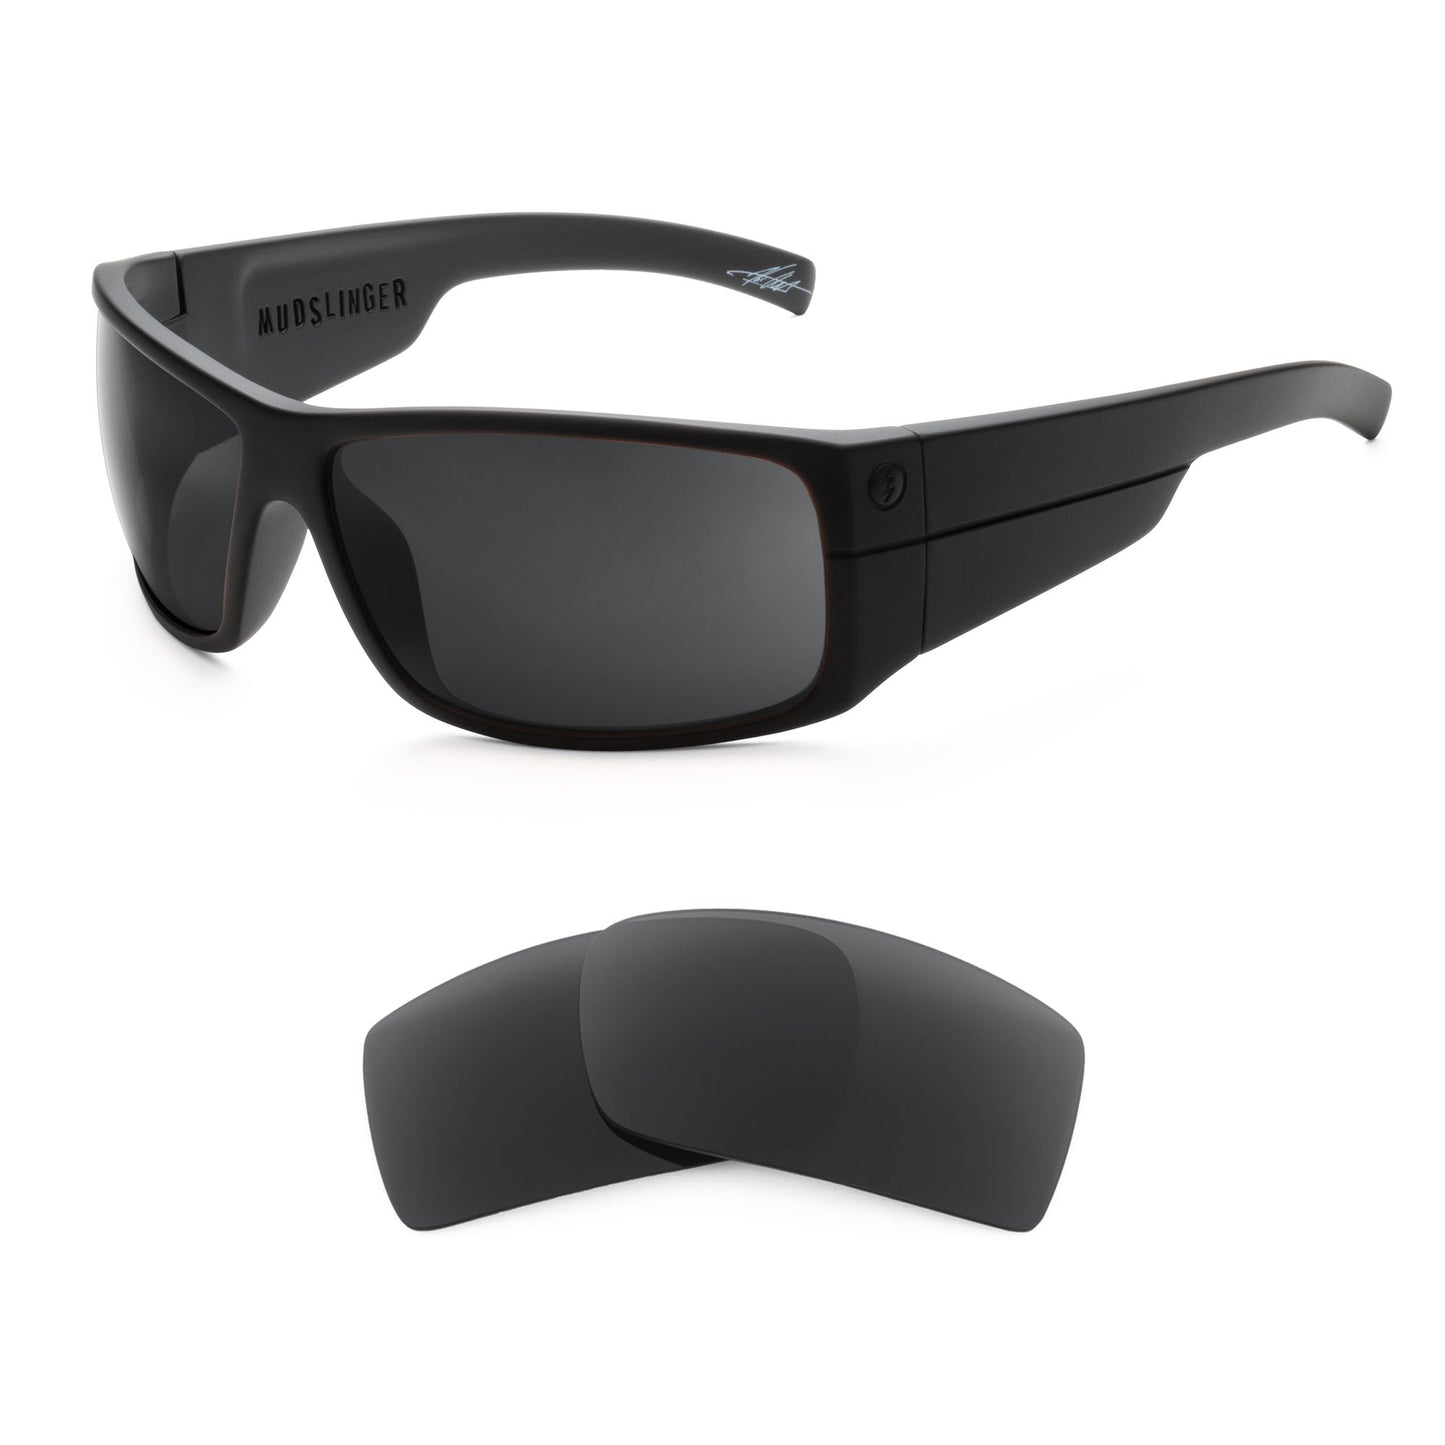 Electric Mudslinger sunglasses with replacement lenses